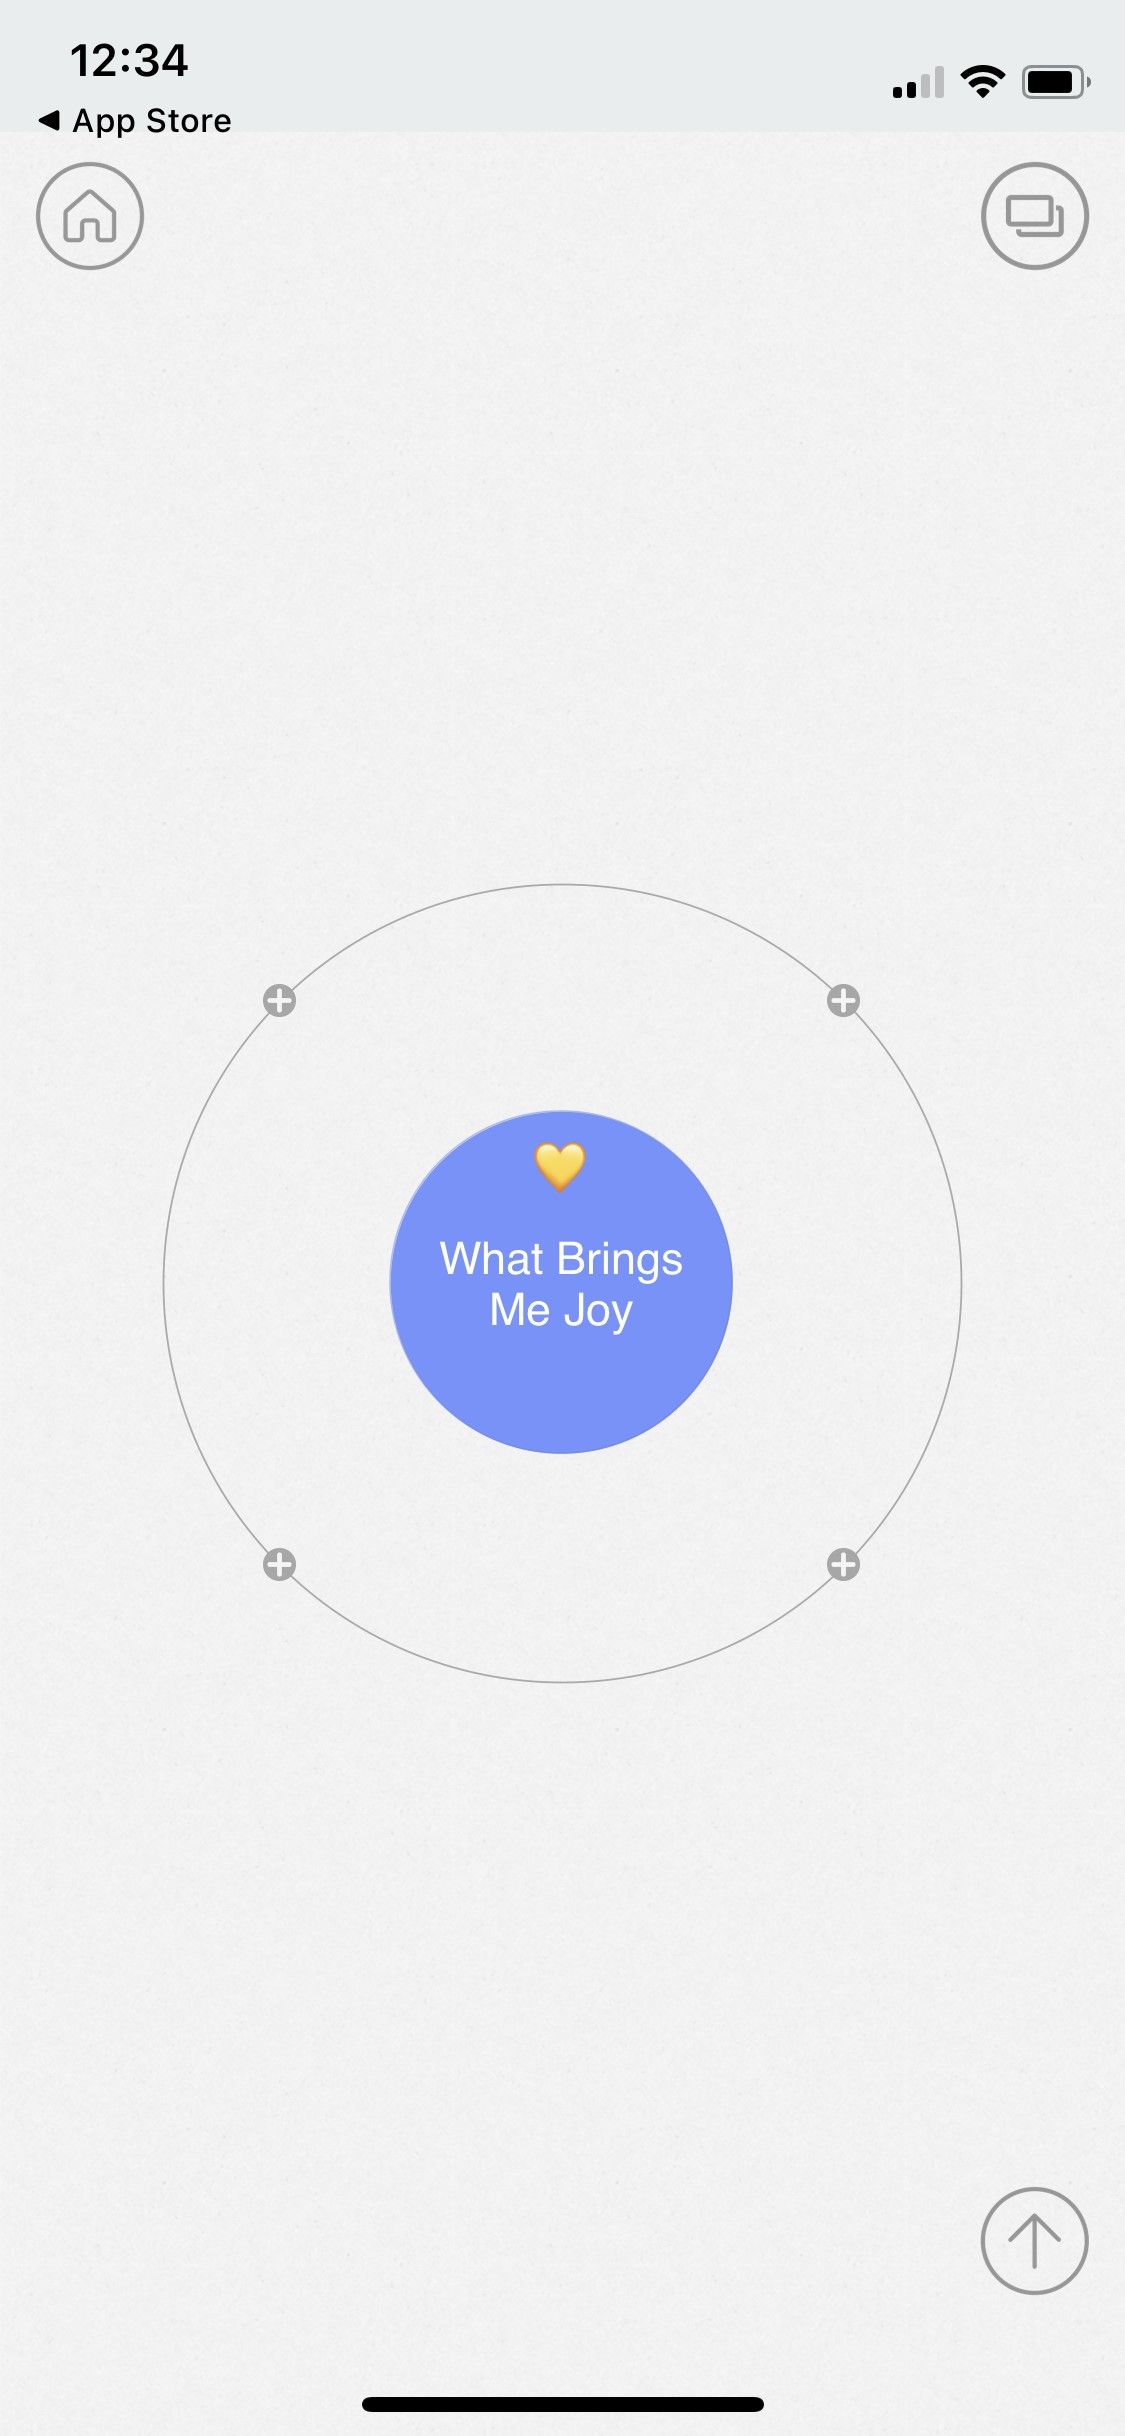 Use Mindly to Pinpoint What Brings Your Joy